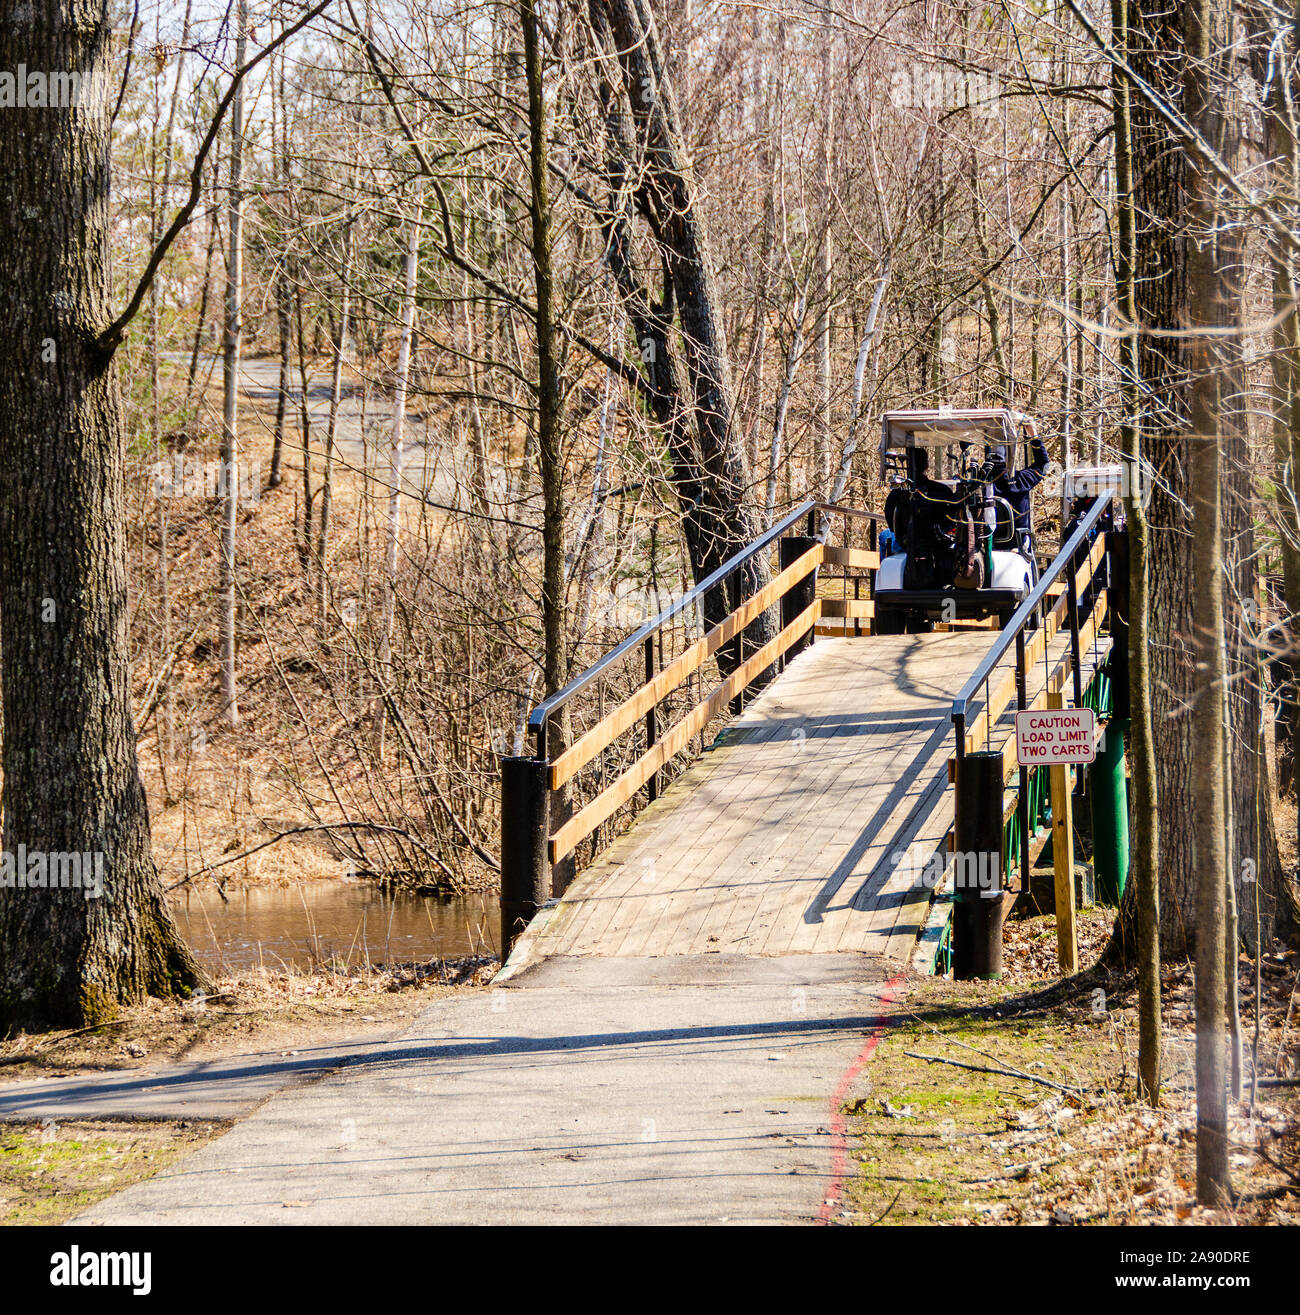 Golfers on golf carts crossing a wooden bridge on a golf course while on their way to the next hole. Stock Photo